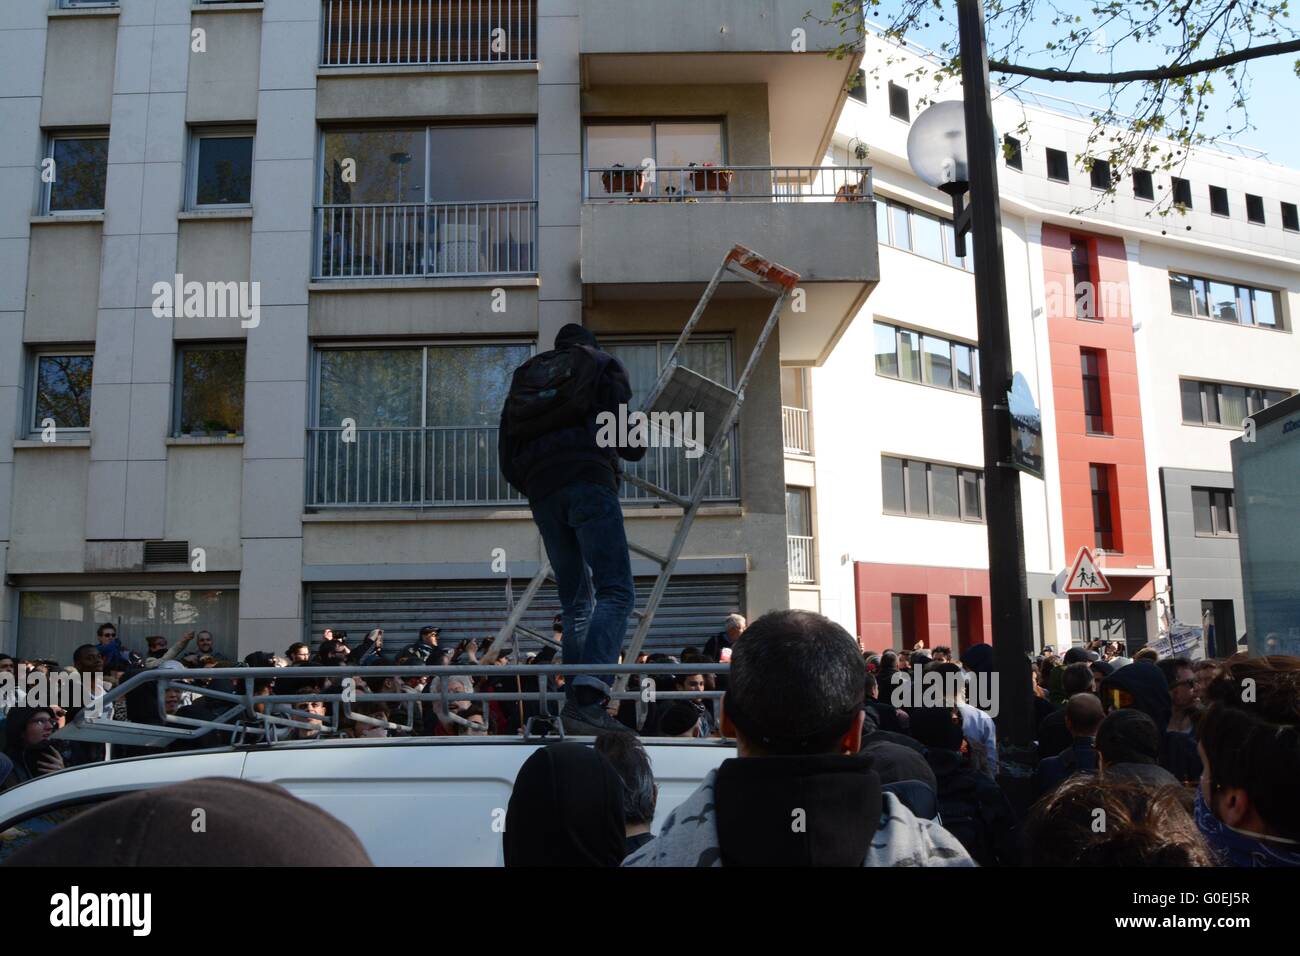 Paris, France. 1 May 2016. Protester takes a ladder off a work vehicle. Credit: Marc Ward/Alamy Live News Stock Photo